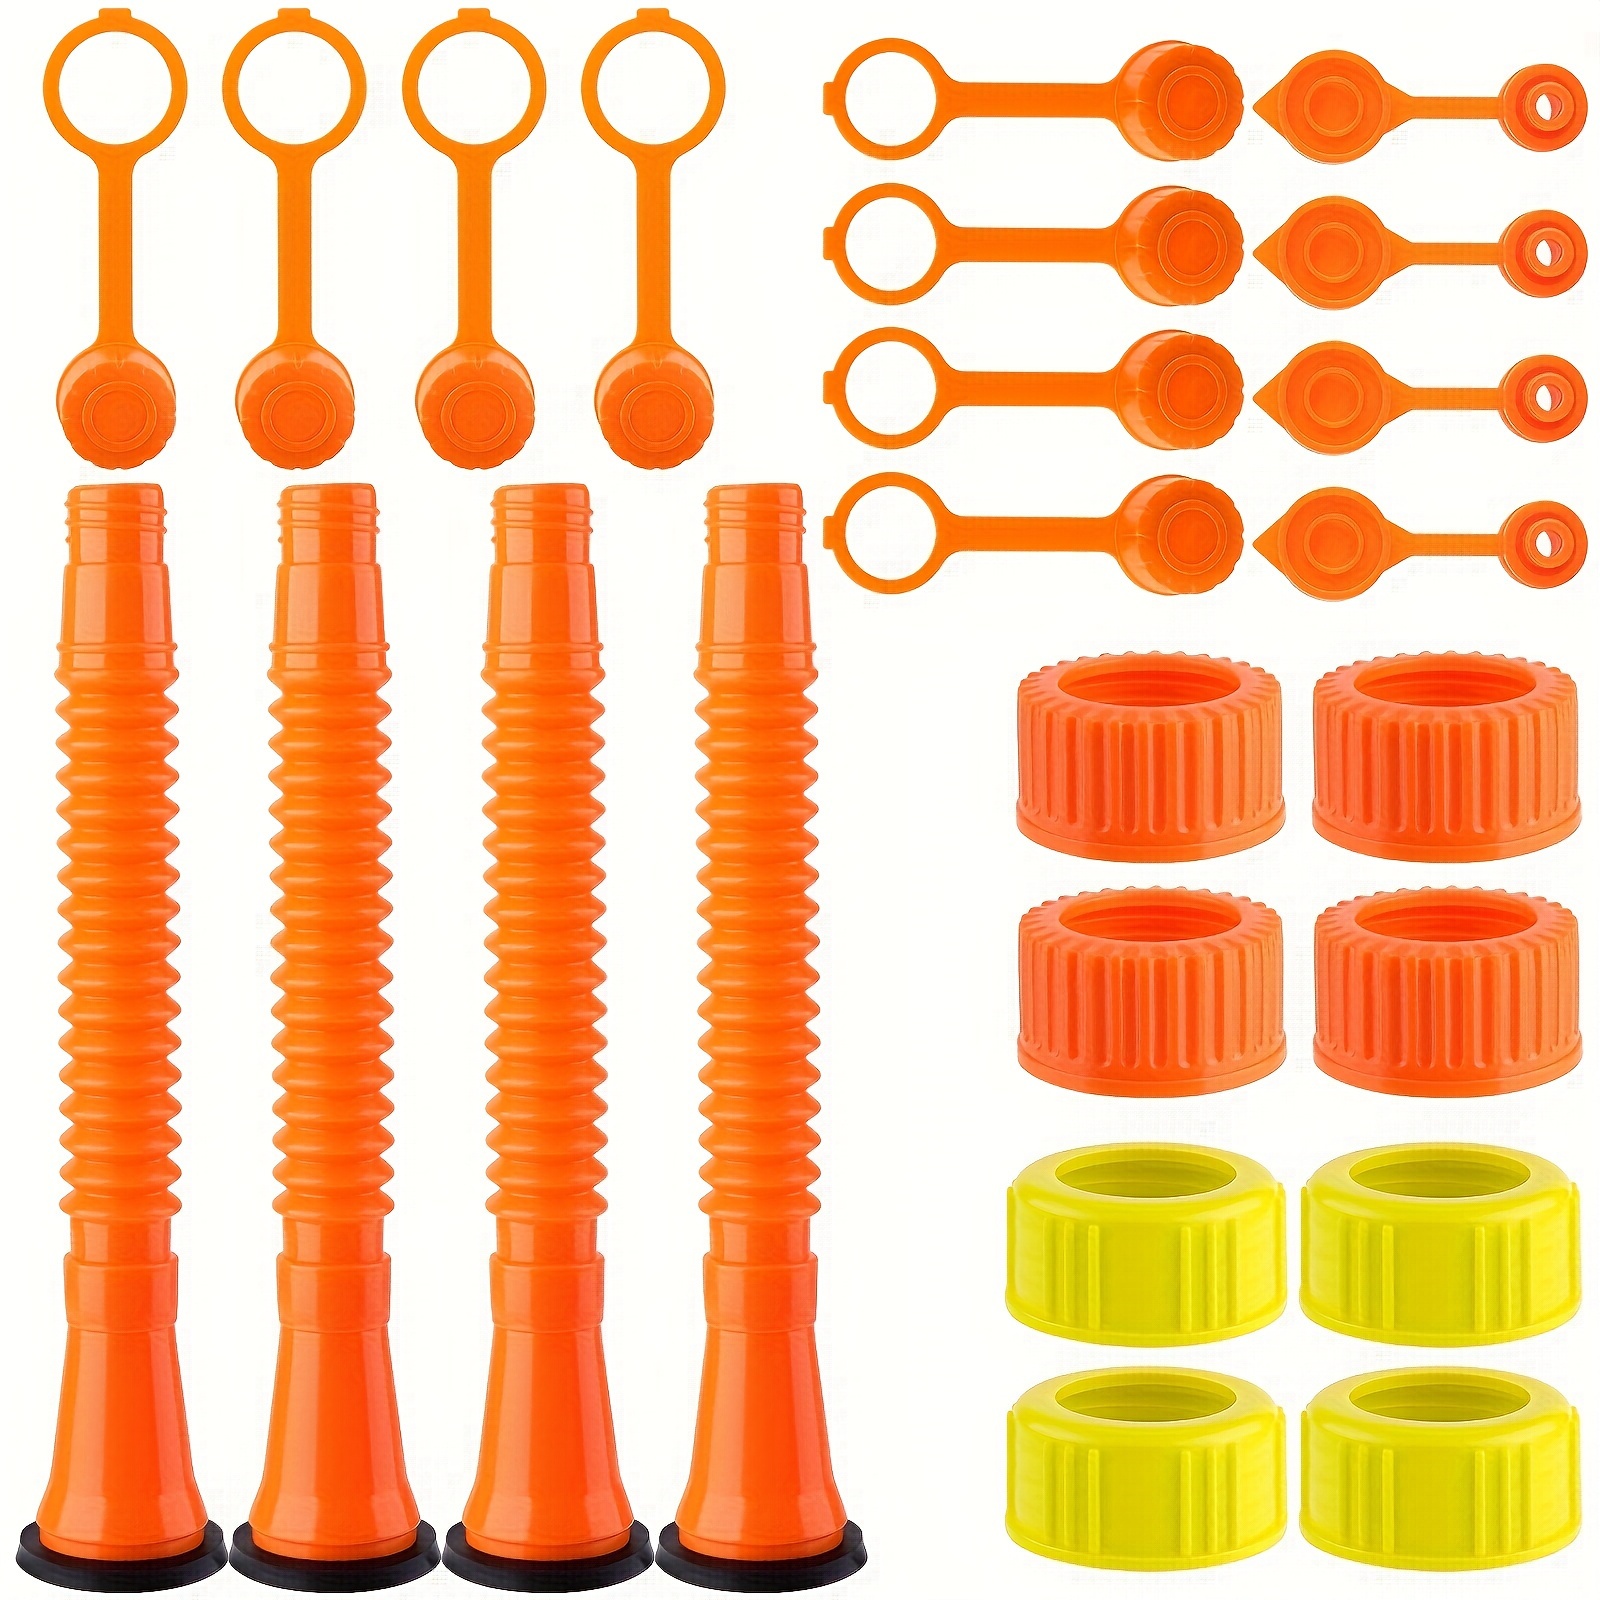 

4kit Gas Can Spout Replacement, Gas Can Nozzle Kit With Screw Collar Caps, Gasket Stopper, And 2 Kinds Gas Can Vent Cap With Drill For Most Gas Can